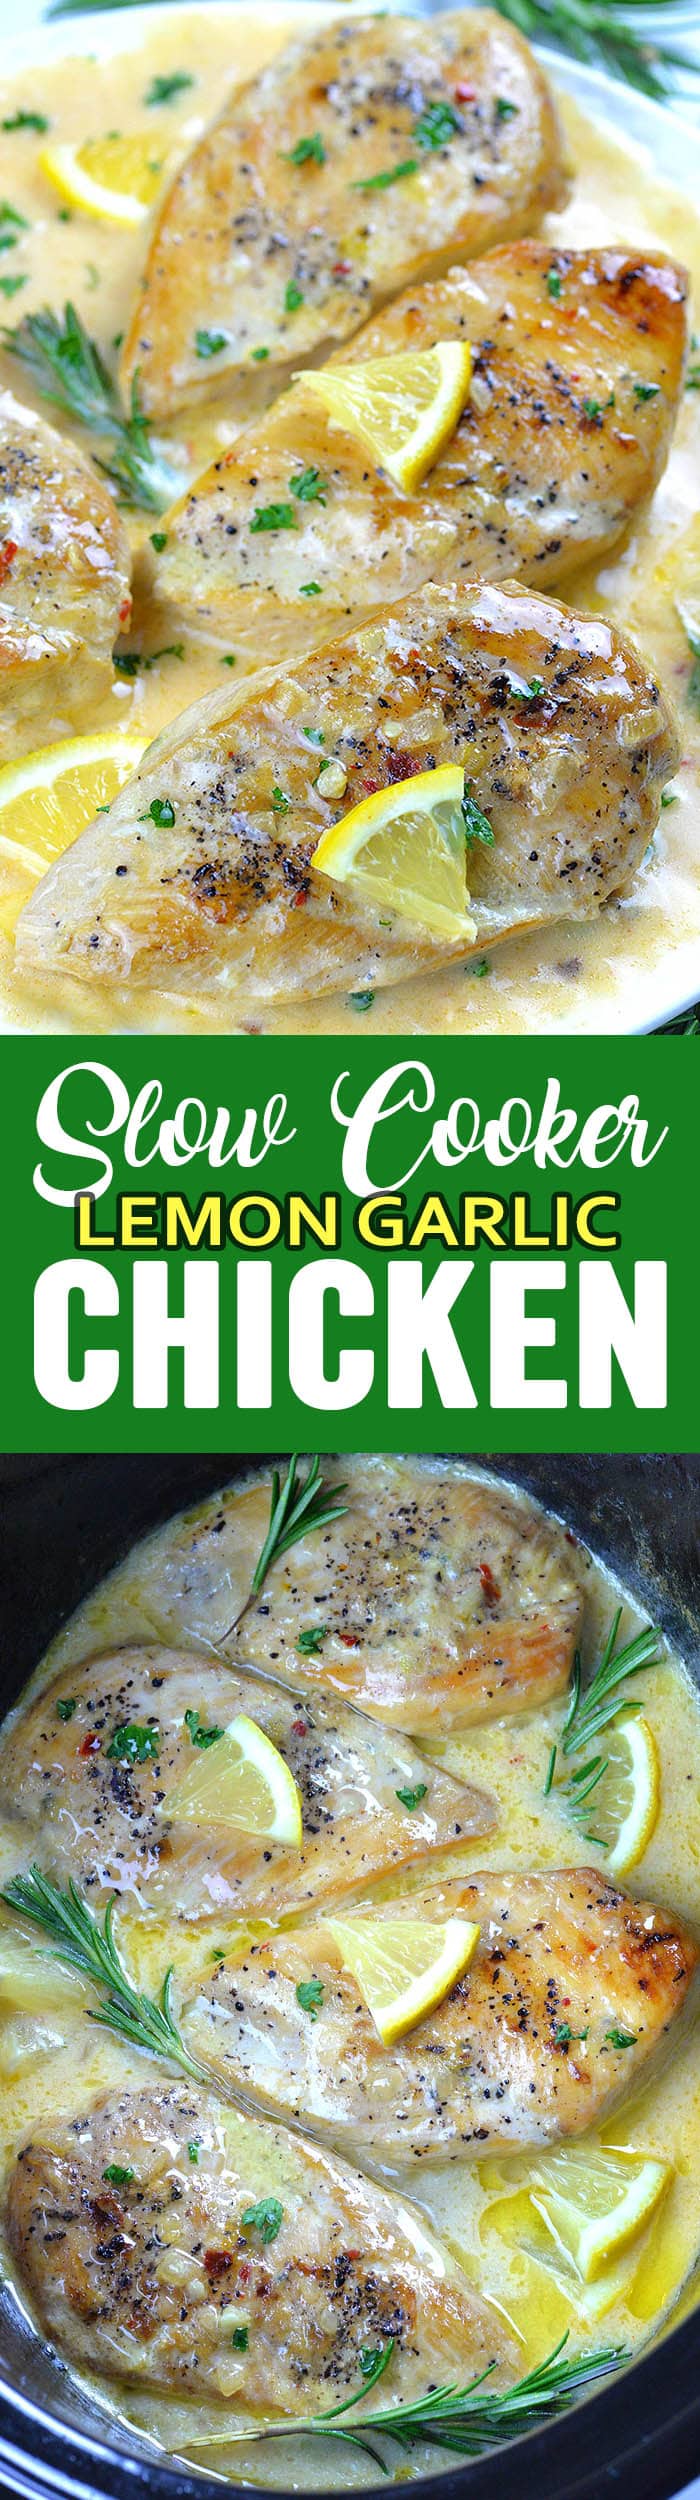 Slow Cooker Lemon Garlic Chicken Recipe is easy and delicious family dinner for busy weeknight. Whole family will enjoy in this juicy and flavorful garlic lemon chicken breast in a creamy sauce. 